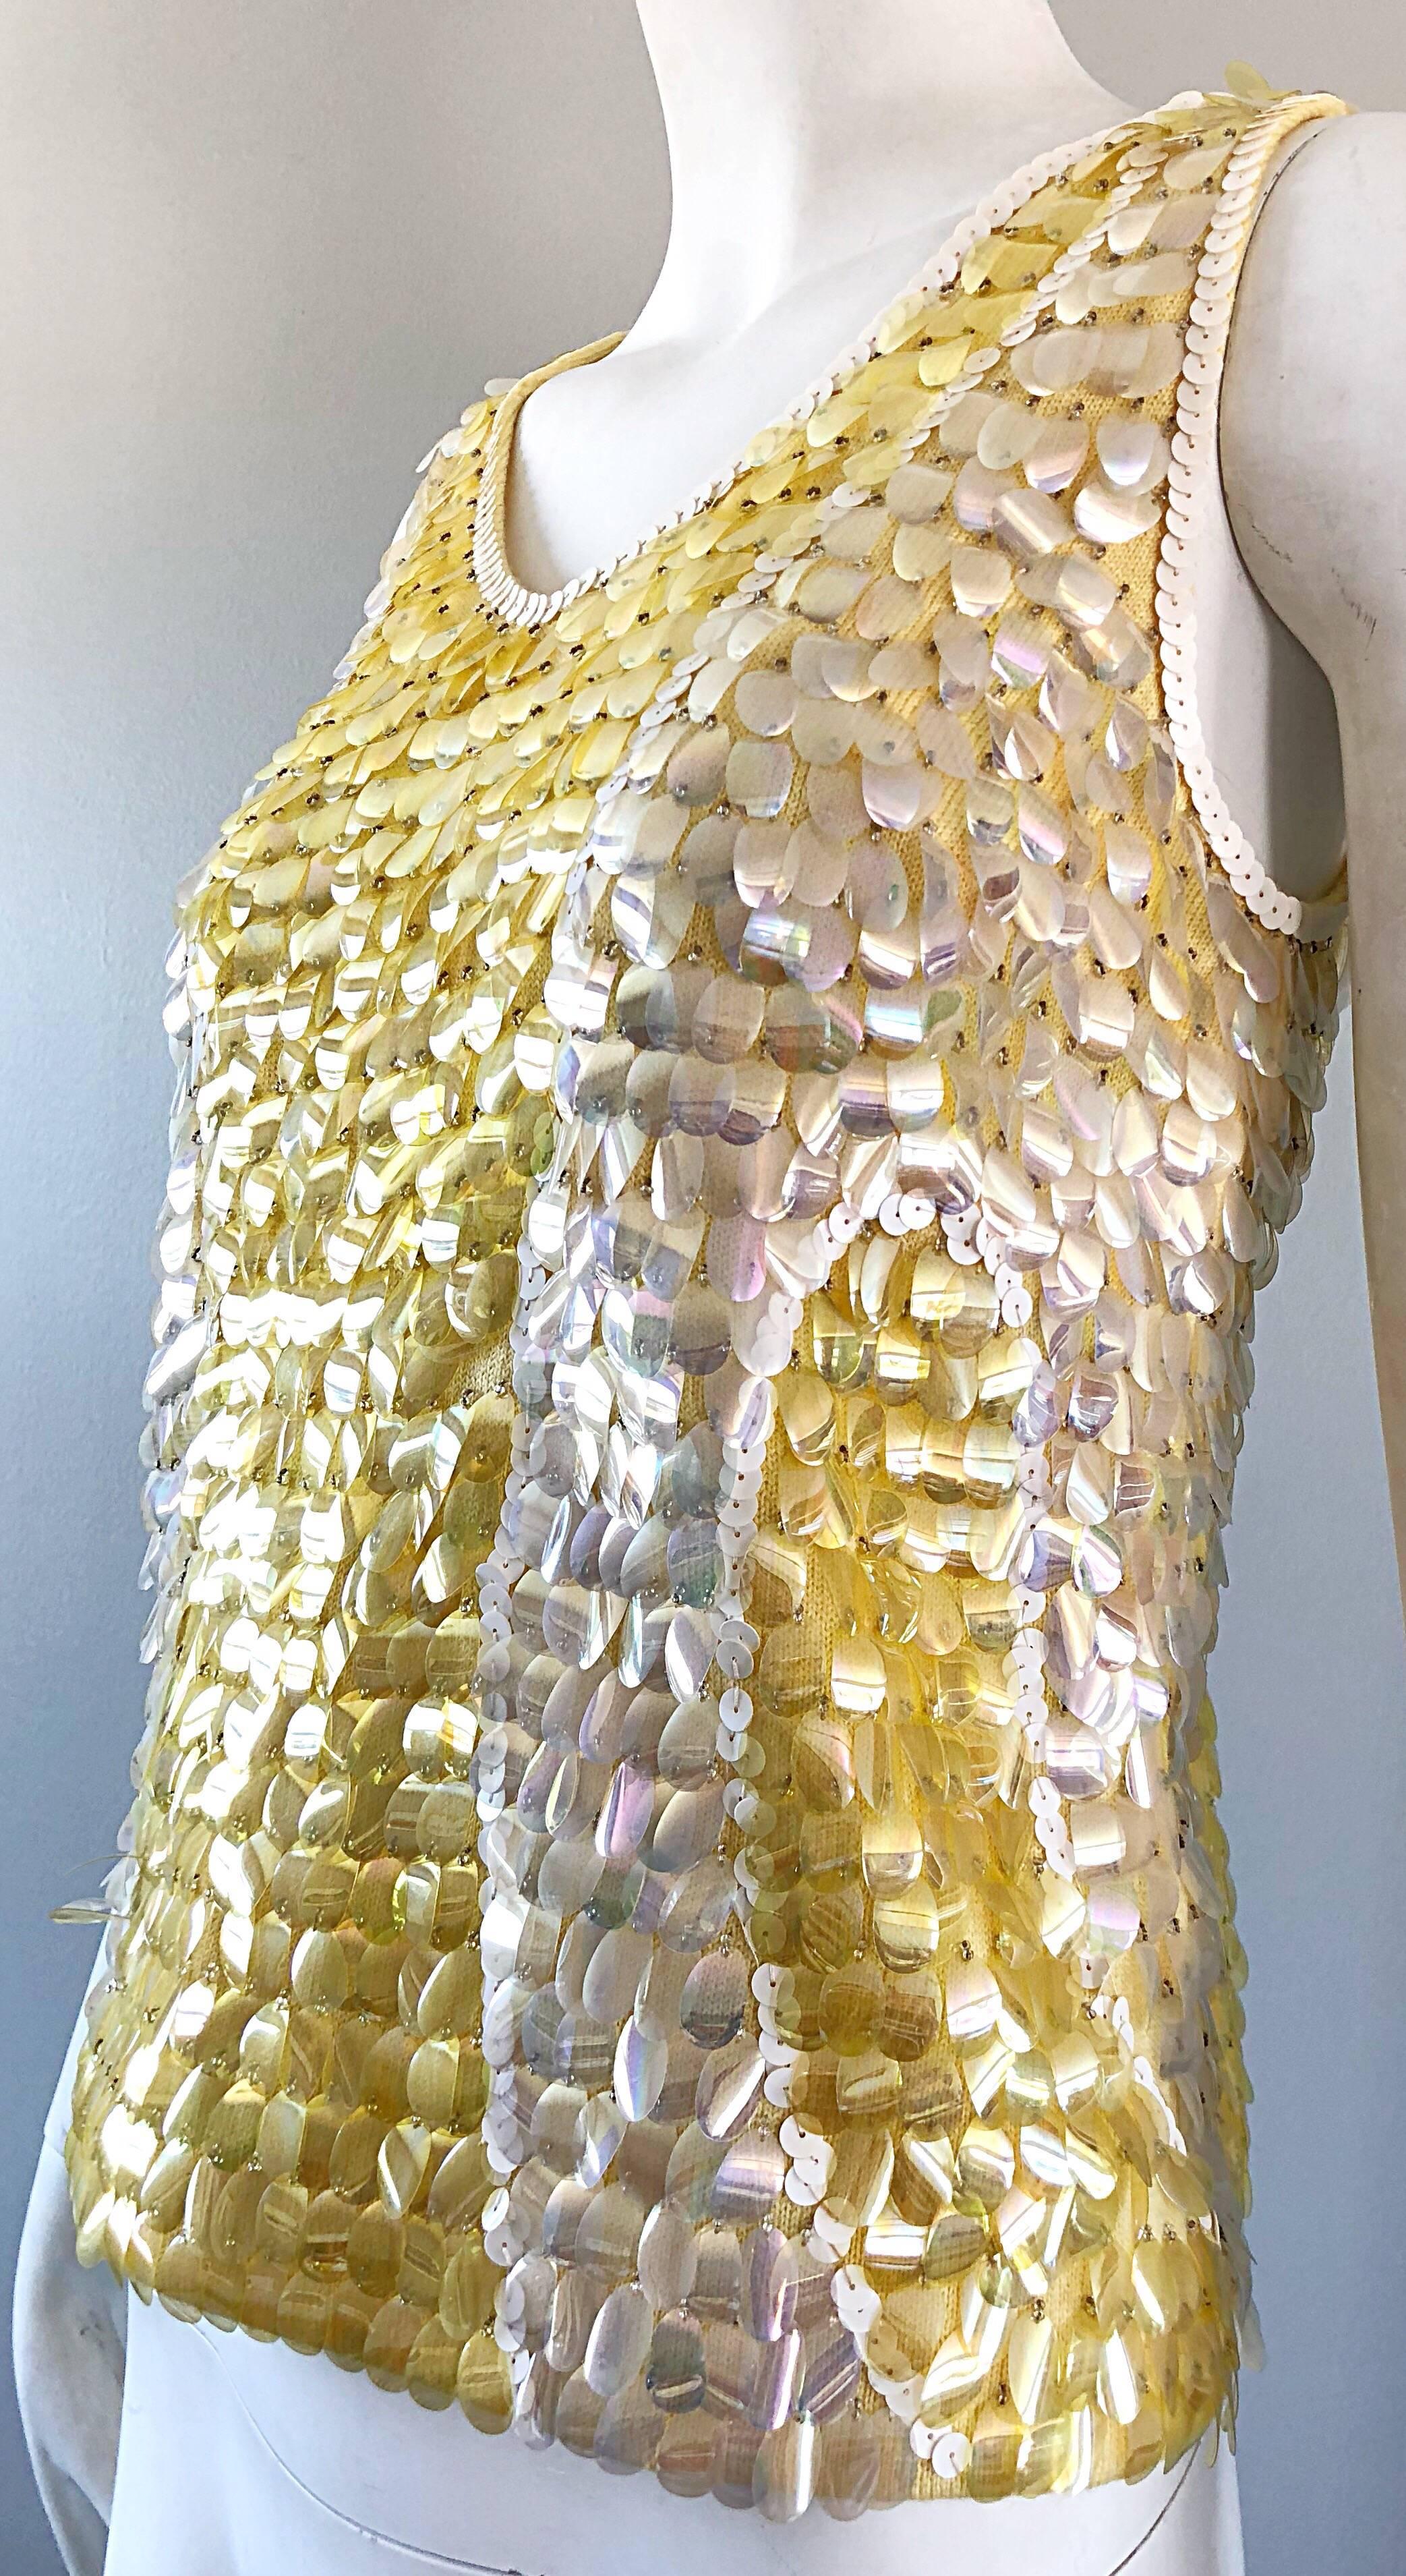 Women's 1960s Yellow + White + Clear Paillettes Sequined Lamb's Wool Sleeveless 60s Top For Sale